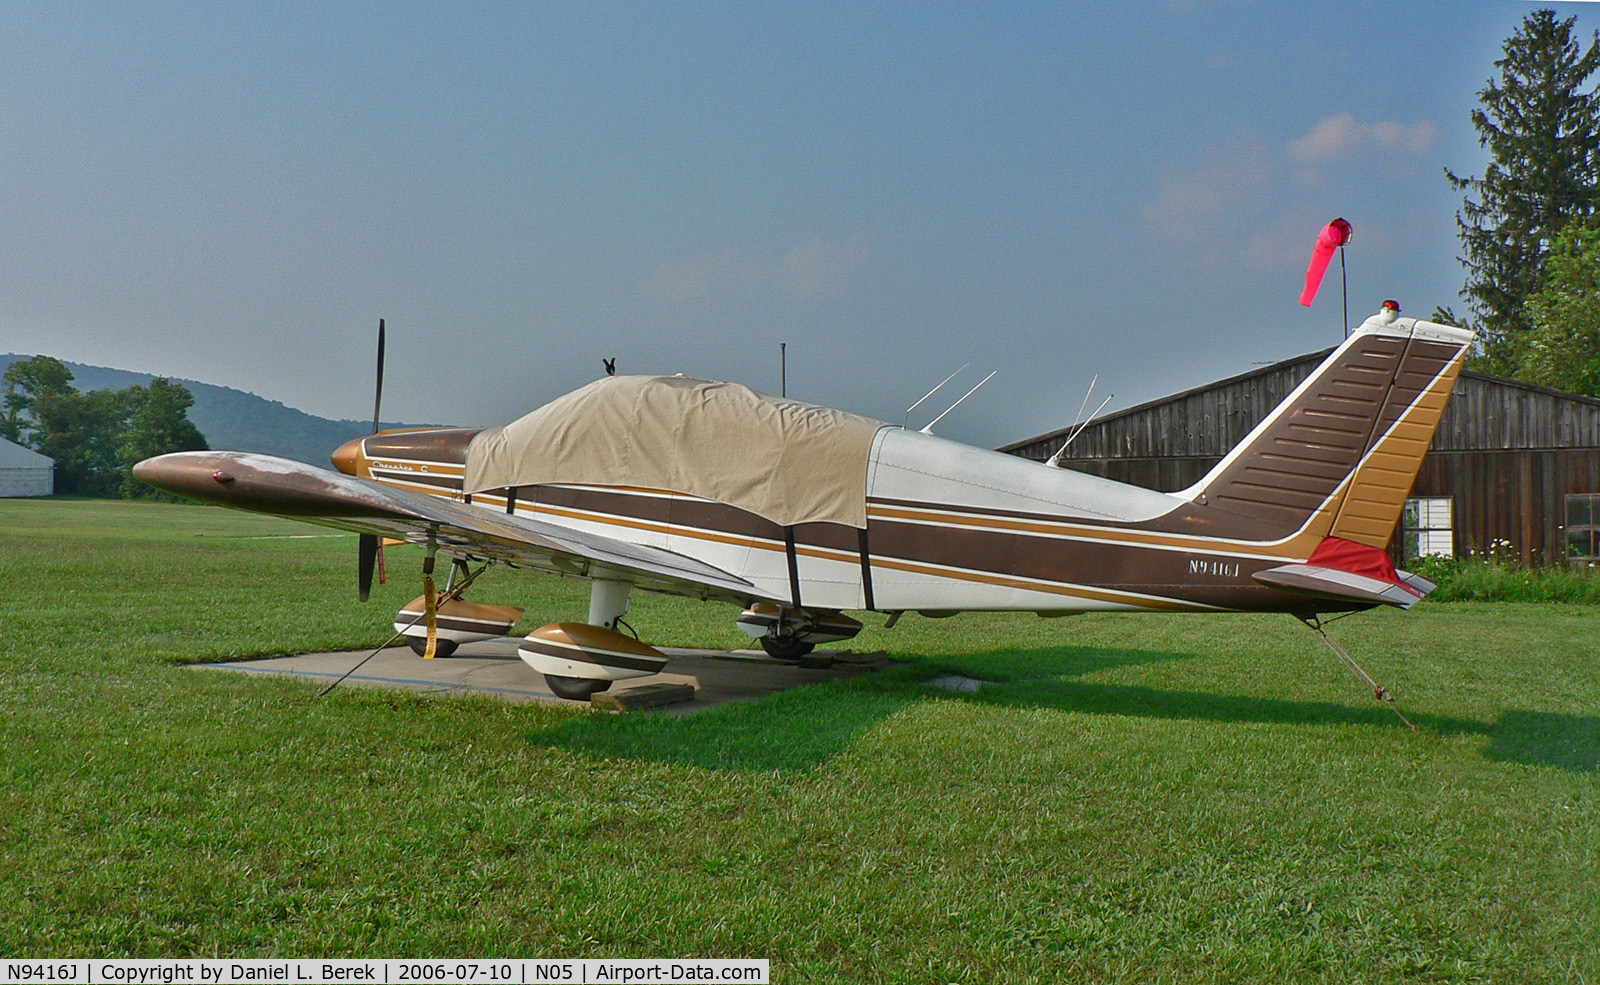 N9416J, 1966 Piper PA-28-180 C/N 28-3526, Faded but well cared-for 1966 Chrokee Archer takes refuge from the summer sun.